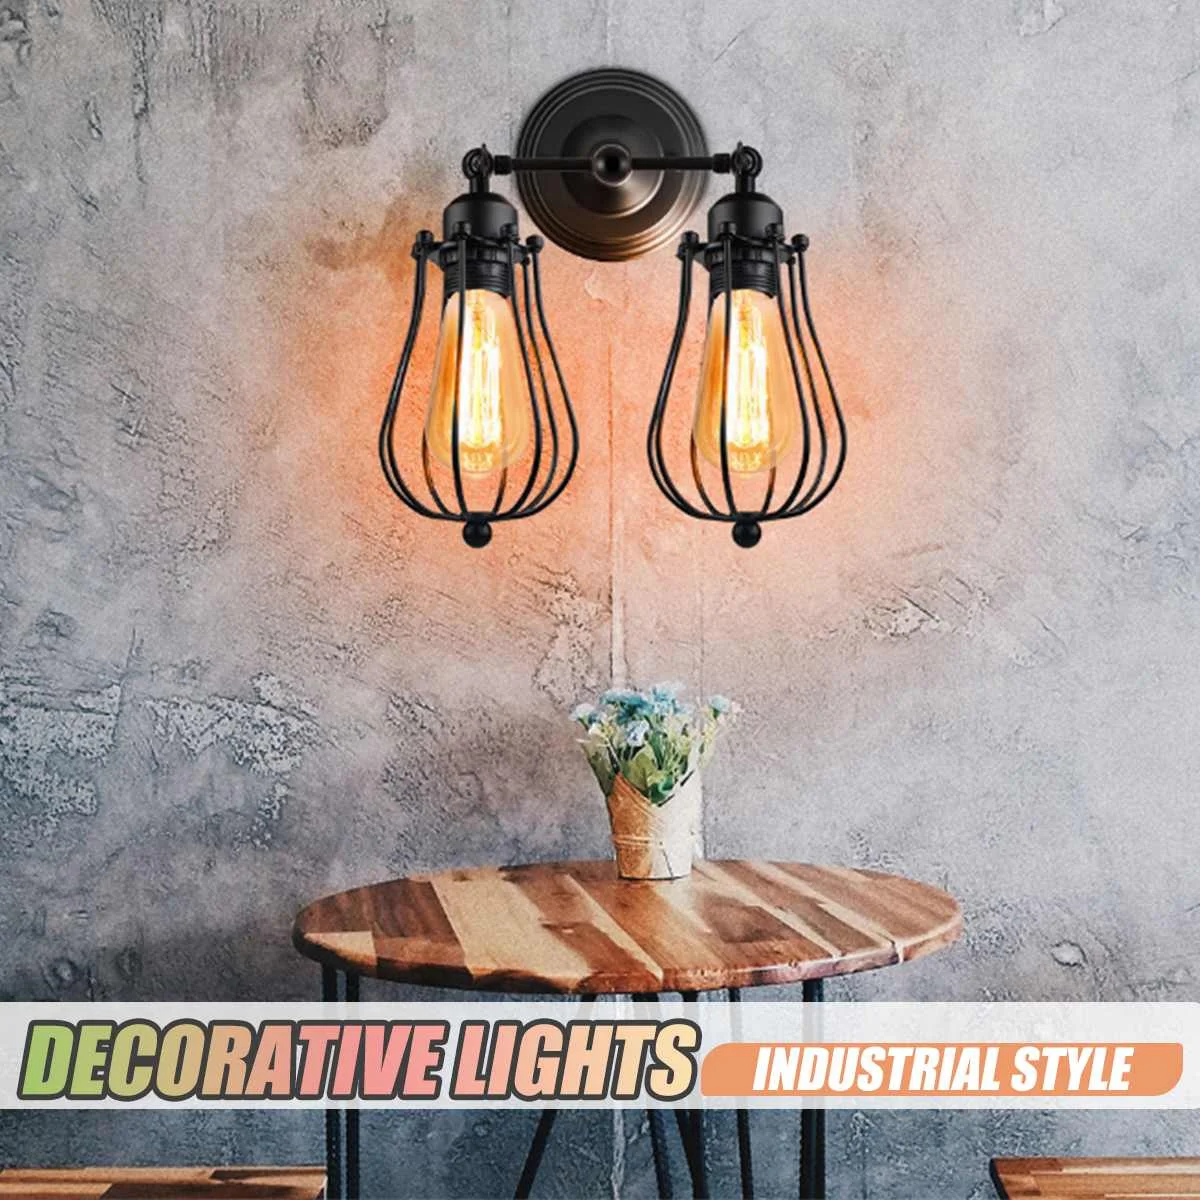 

Industrial Double Head Wall Sconce Lights American Rustic Wrought Iron Antique Restaurant Corridor Decoration LED Wall Lamp